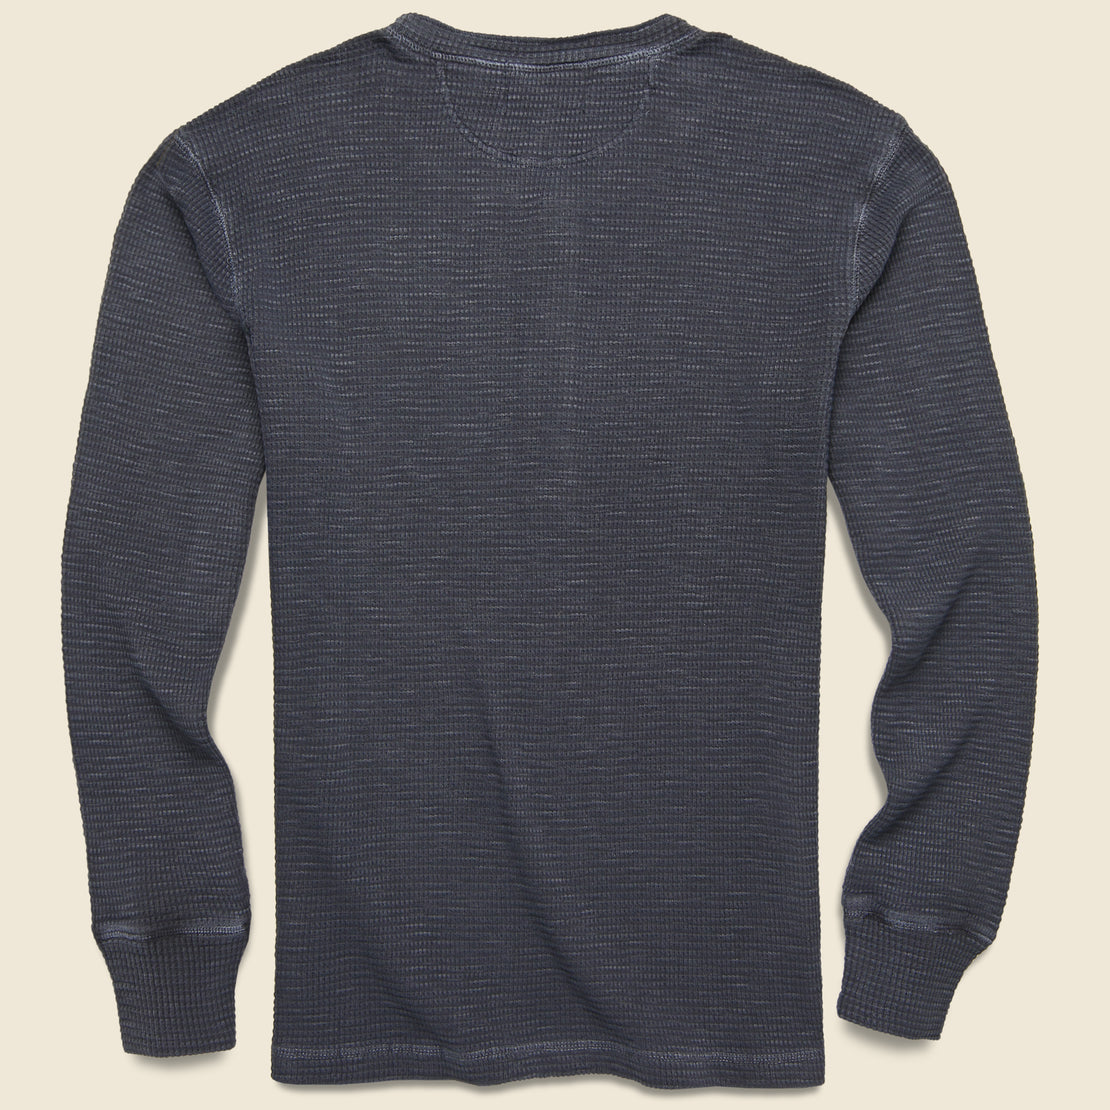 Hitchhiker Henley, Navy Waffle Knit